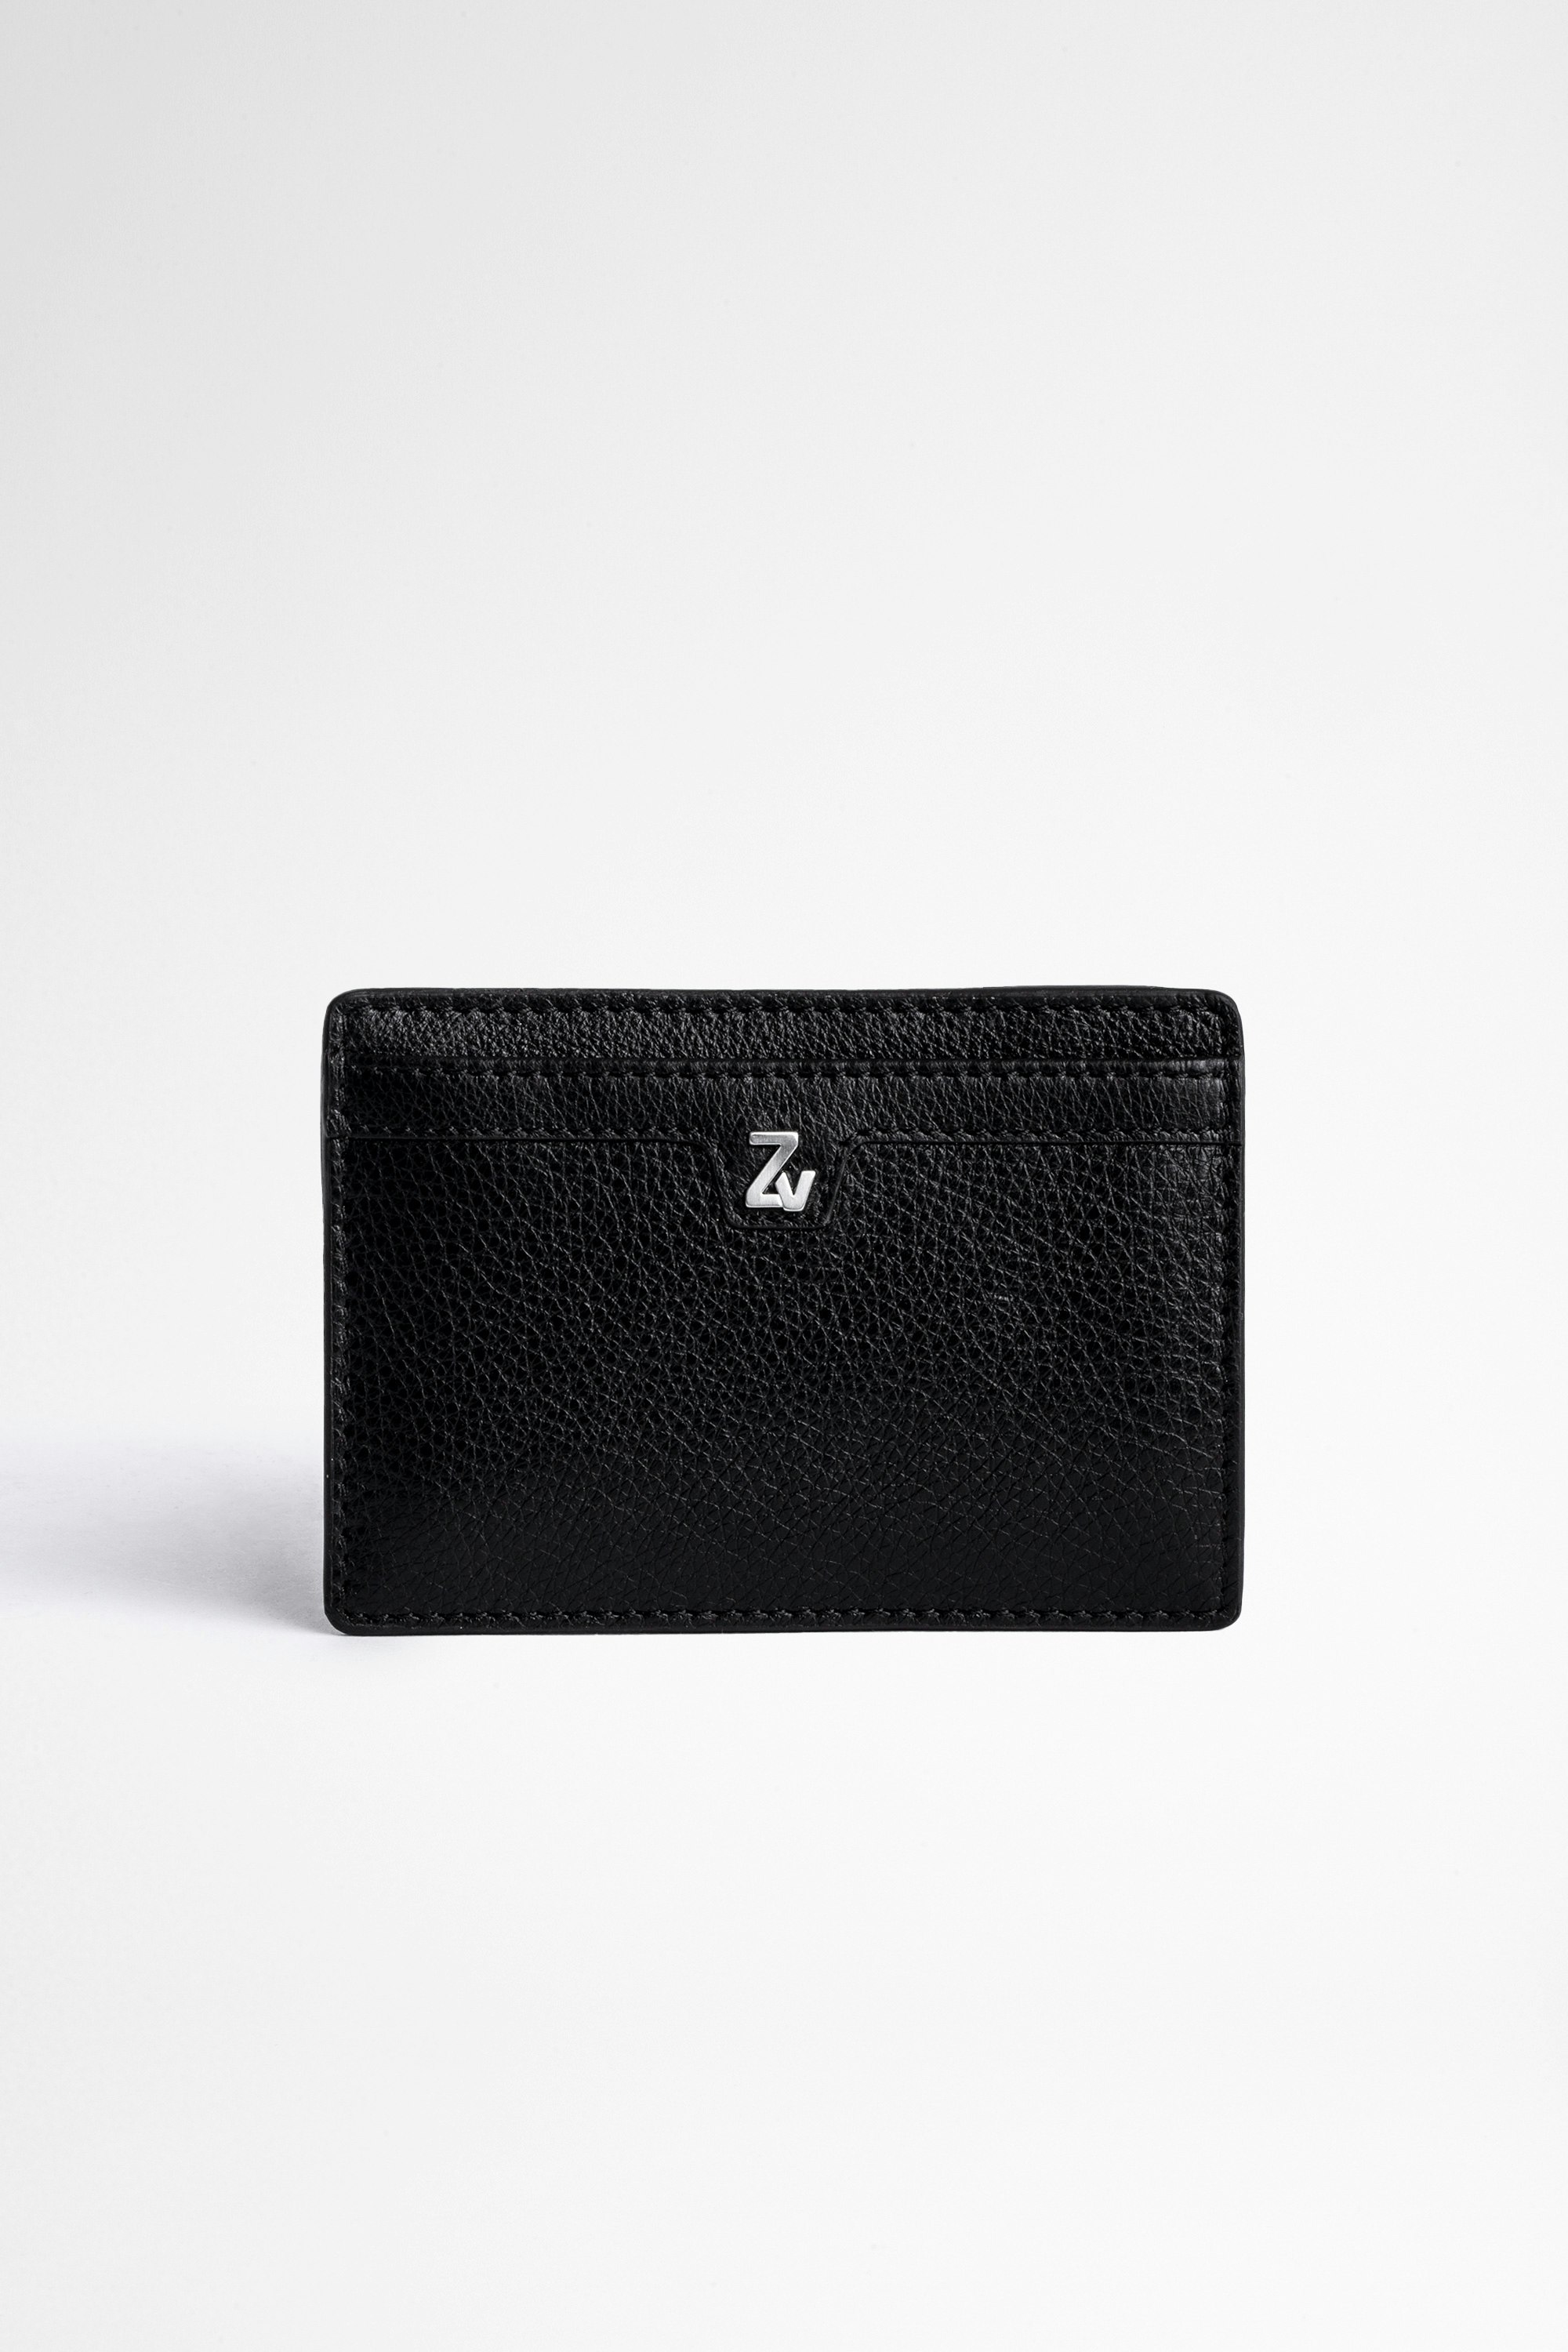 ZV Initiale Niels レザー財布 Men's black grained leather card holder